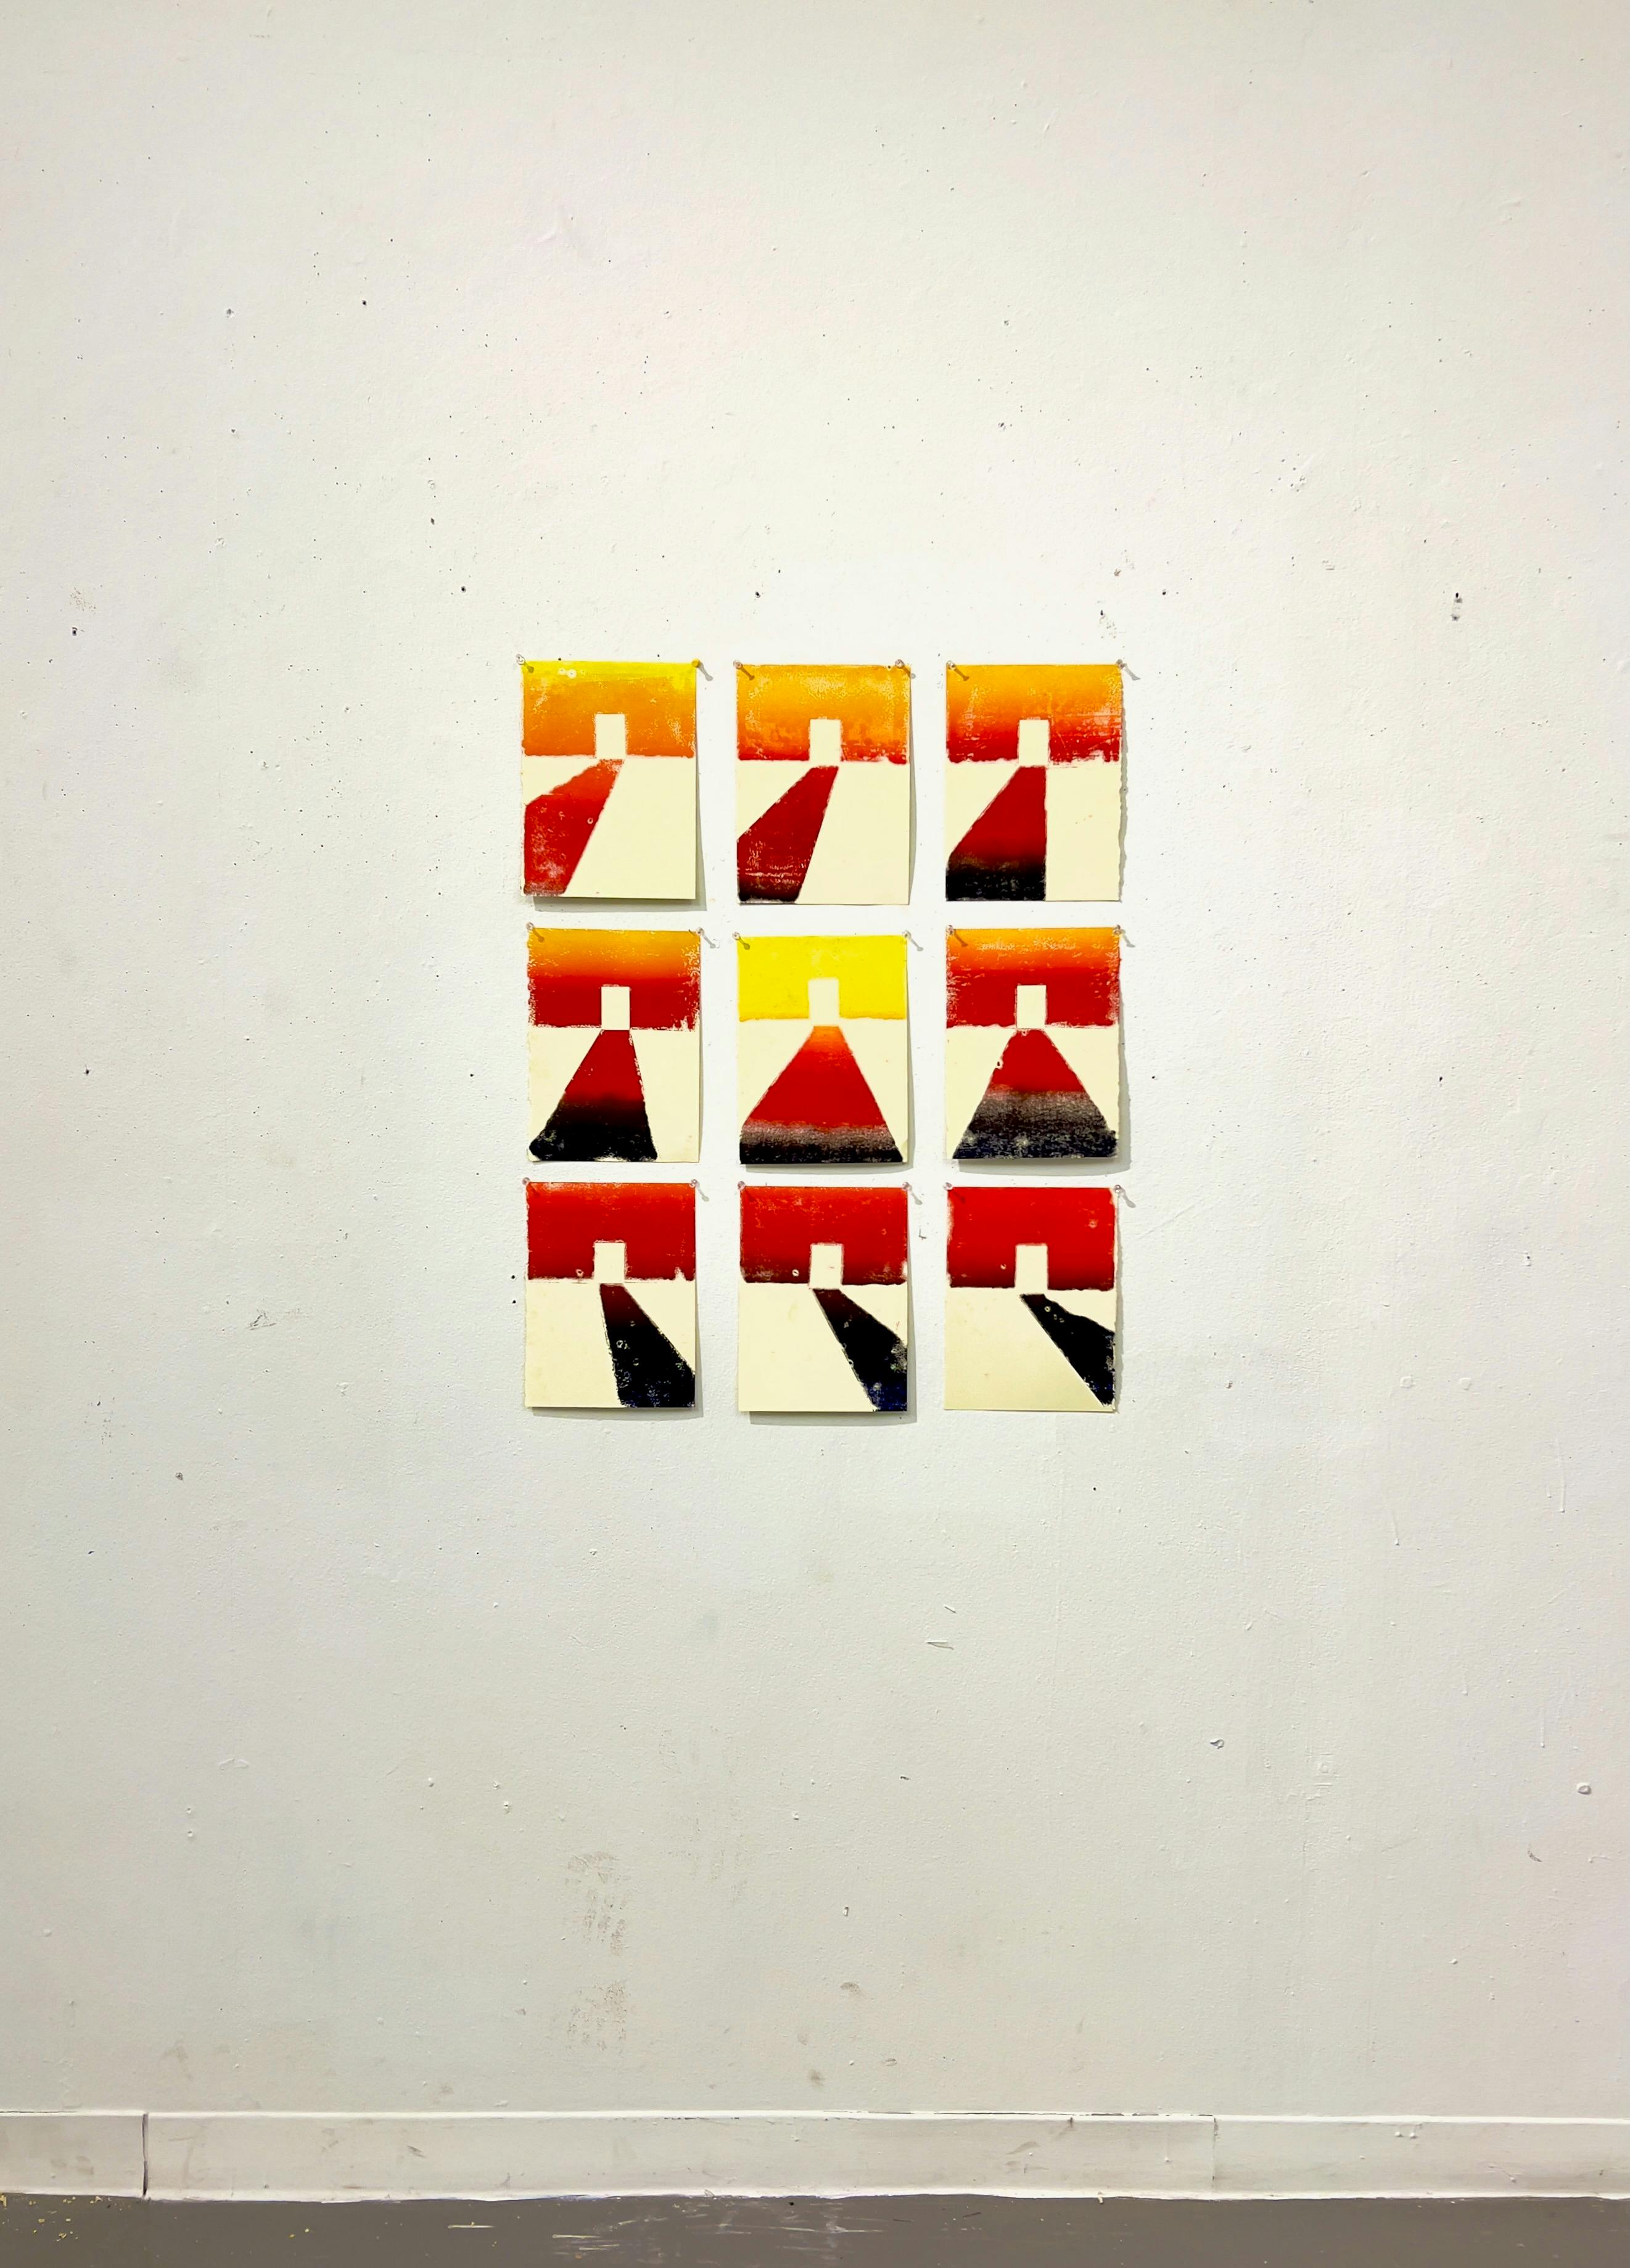 A series of nine monoprints arranged in a 3x3 grid on a white wall. Each print features an abstract doorway with light coming through it. The light is changing in each print, suggesting the passage of time. The color palette includes warm tones of yellow, orange, red, and a dark blue